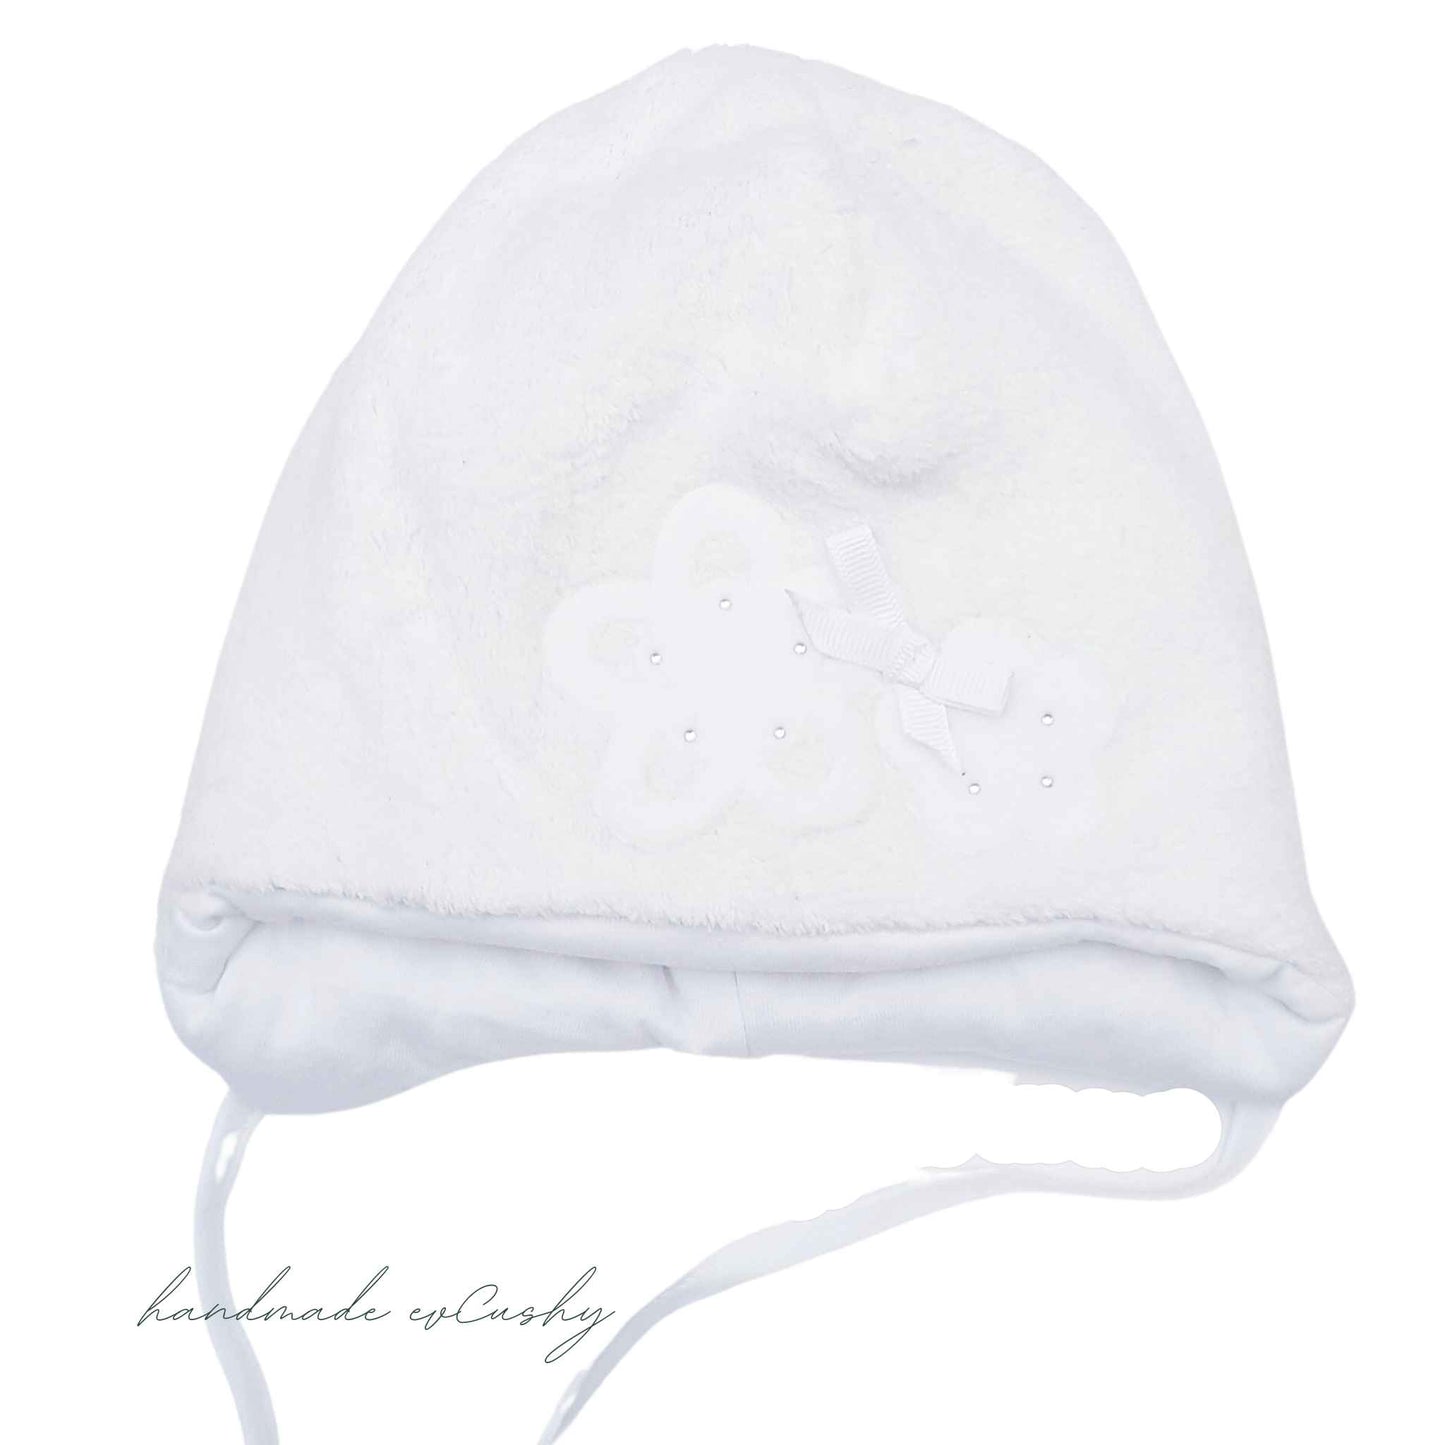 white hats for baby girl winter warm hats bonnet hat with flower and white bow evcushy